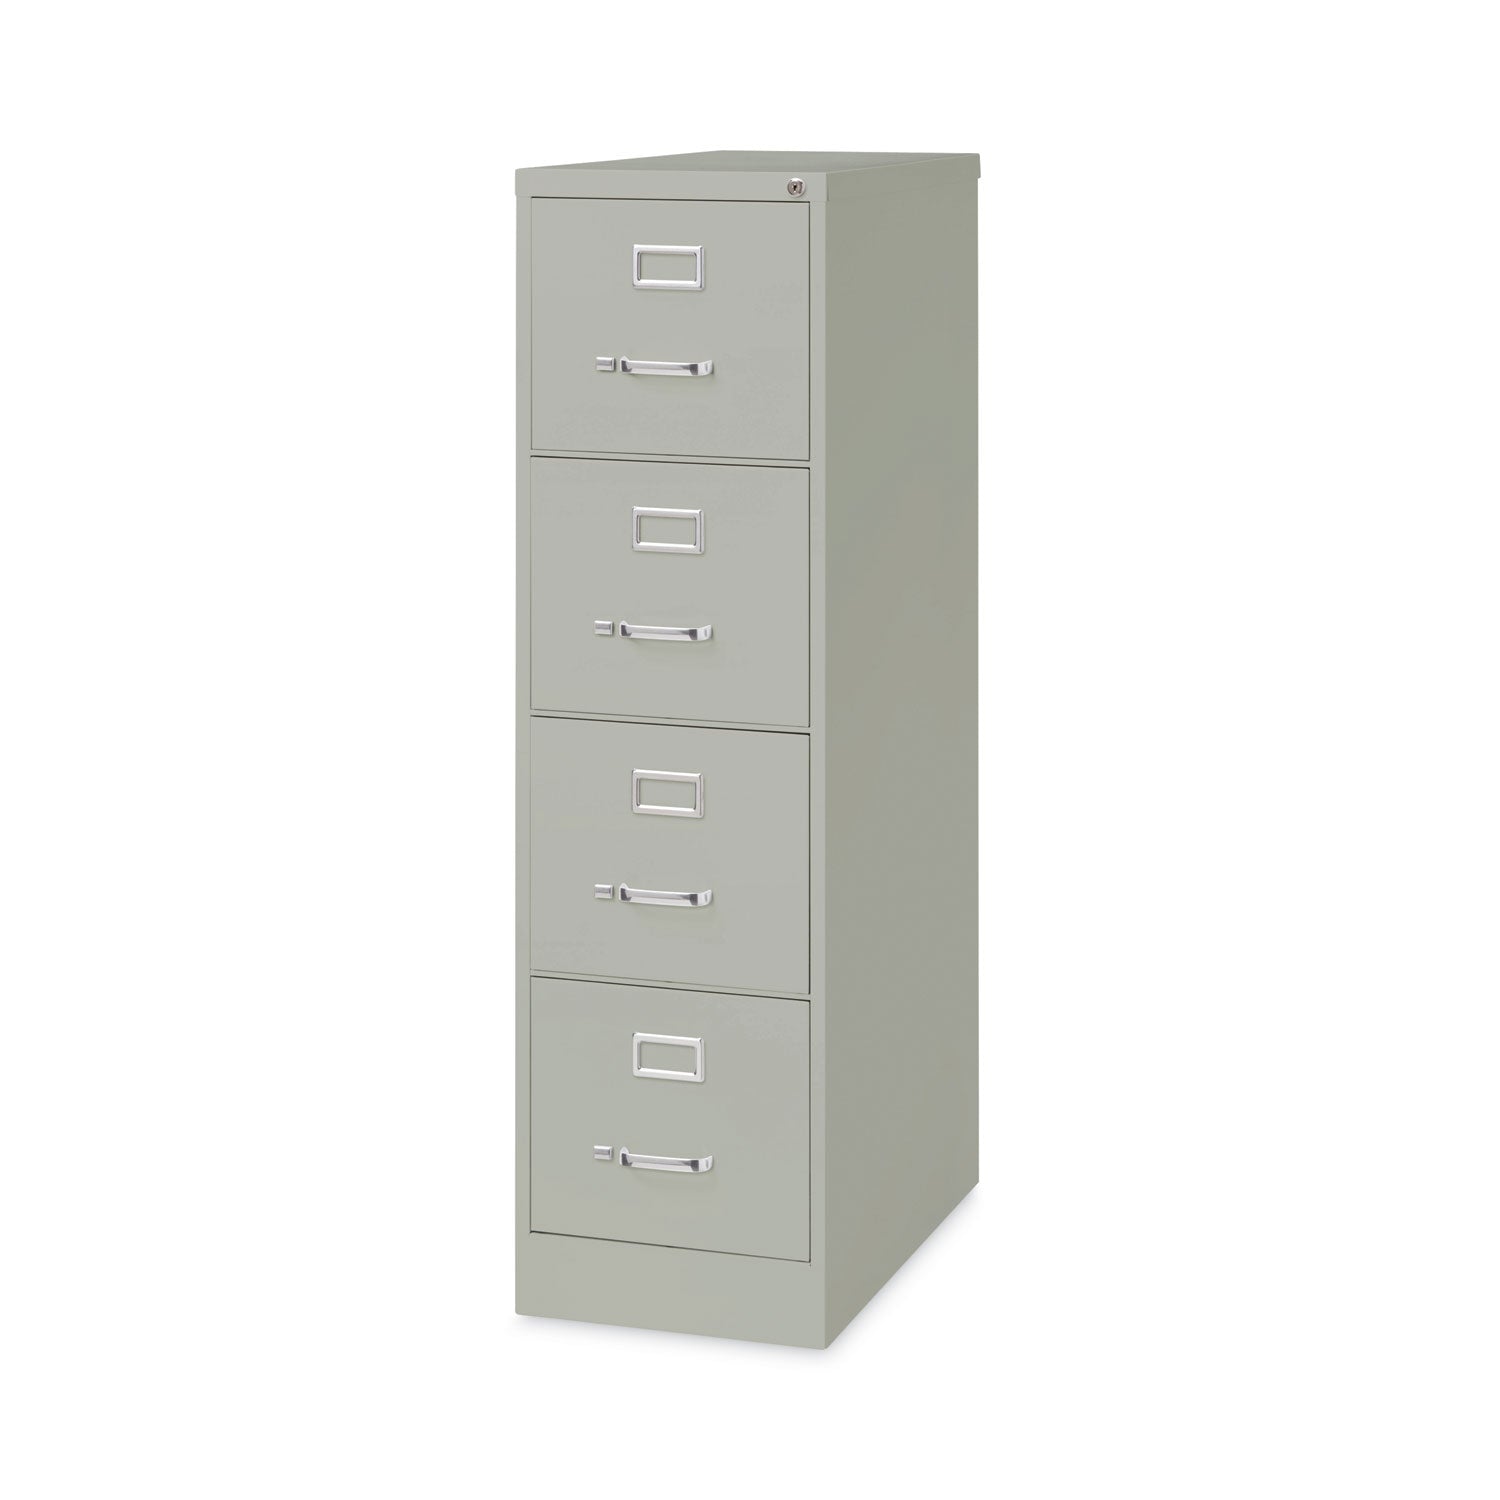 vertical-letter-file-cabinet-4-letter-size-file-drawers-light-gray-15-x-265-x-52_hid14029 - 1